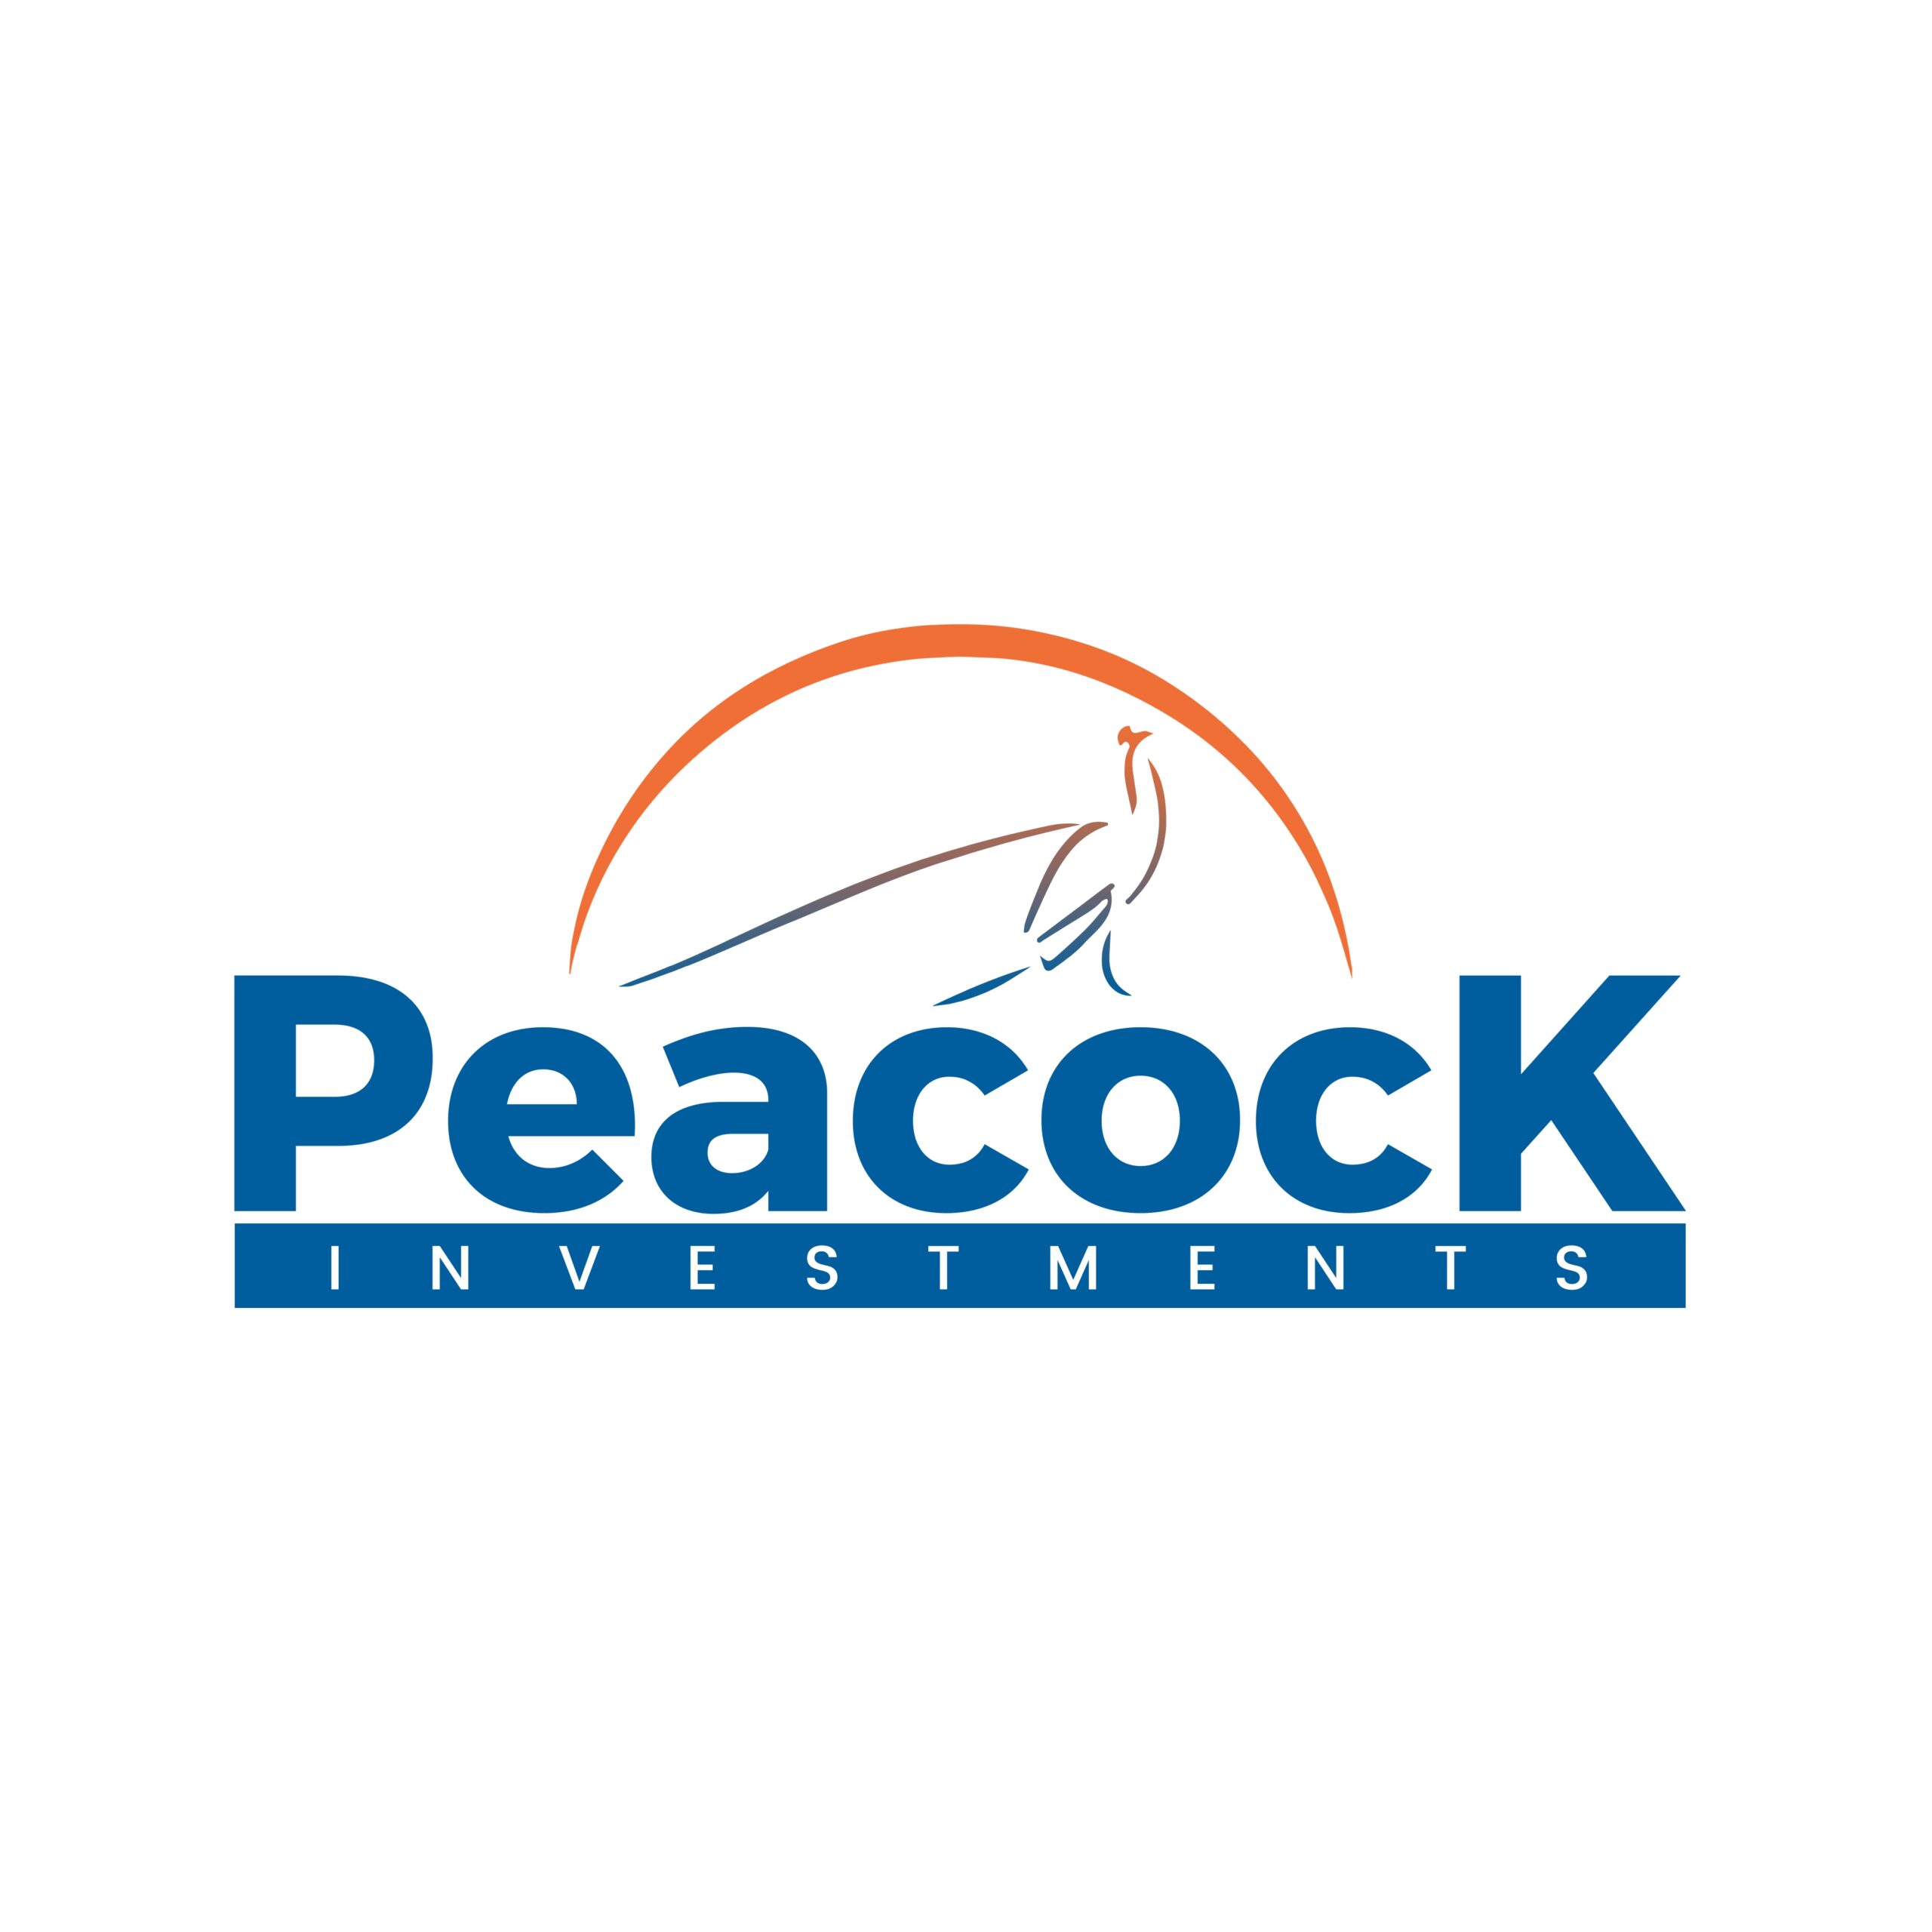 PEACOCK INVESTMENT